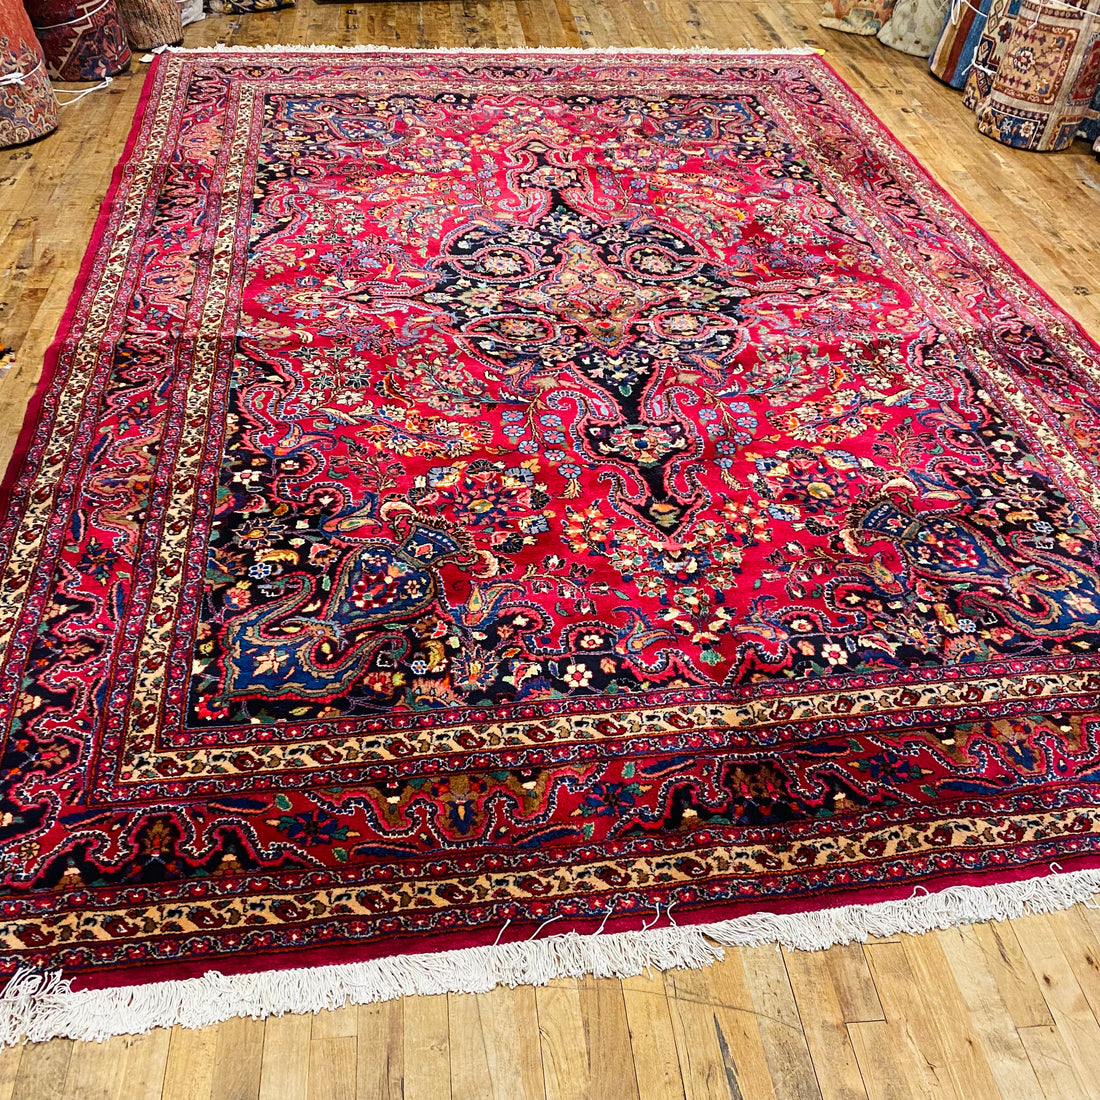 What is an Antique Rug, and Why Should You Consider Buying One?